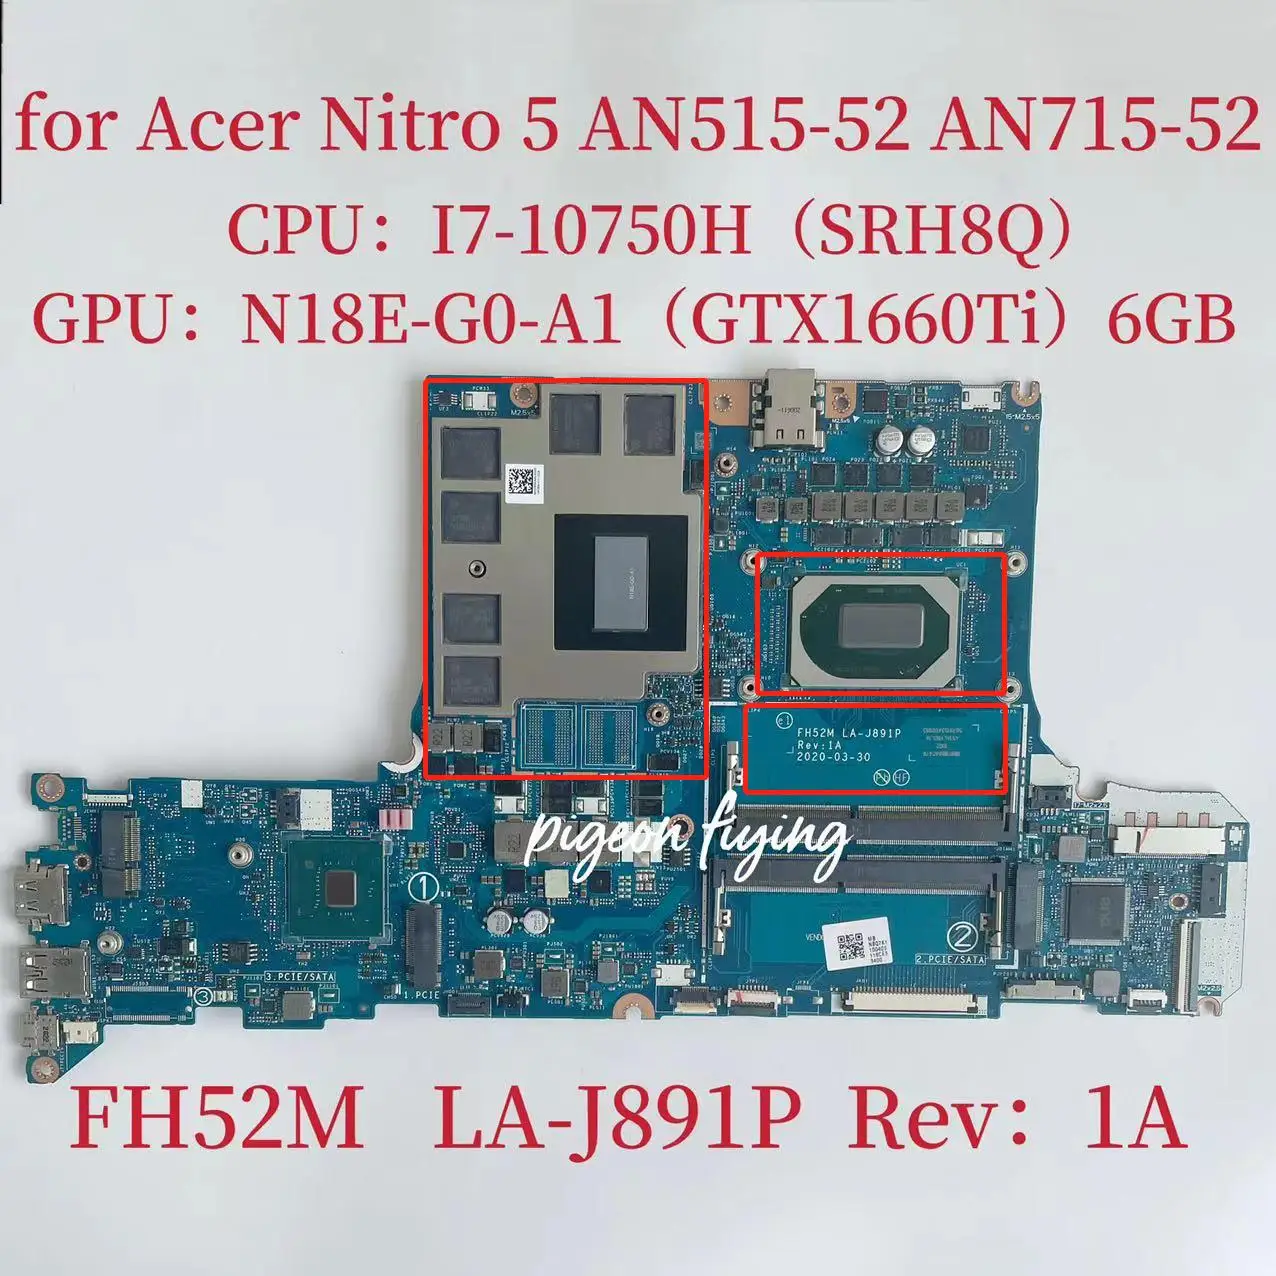 

PT315-52 Mainboard for Acer Nitro 5 AN515-52 Laptop Motherboard CPU:I7-10750H GPU:N18E-G0-A1 GTX1660Ti 6GB DDR4 FH52M LA-J891P